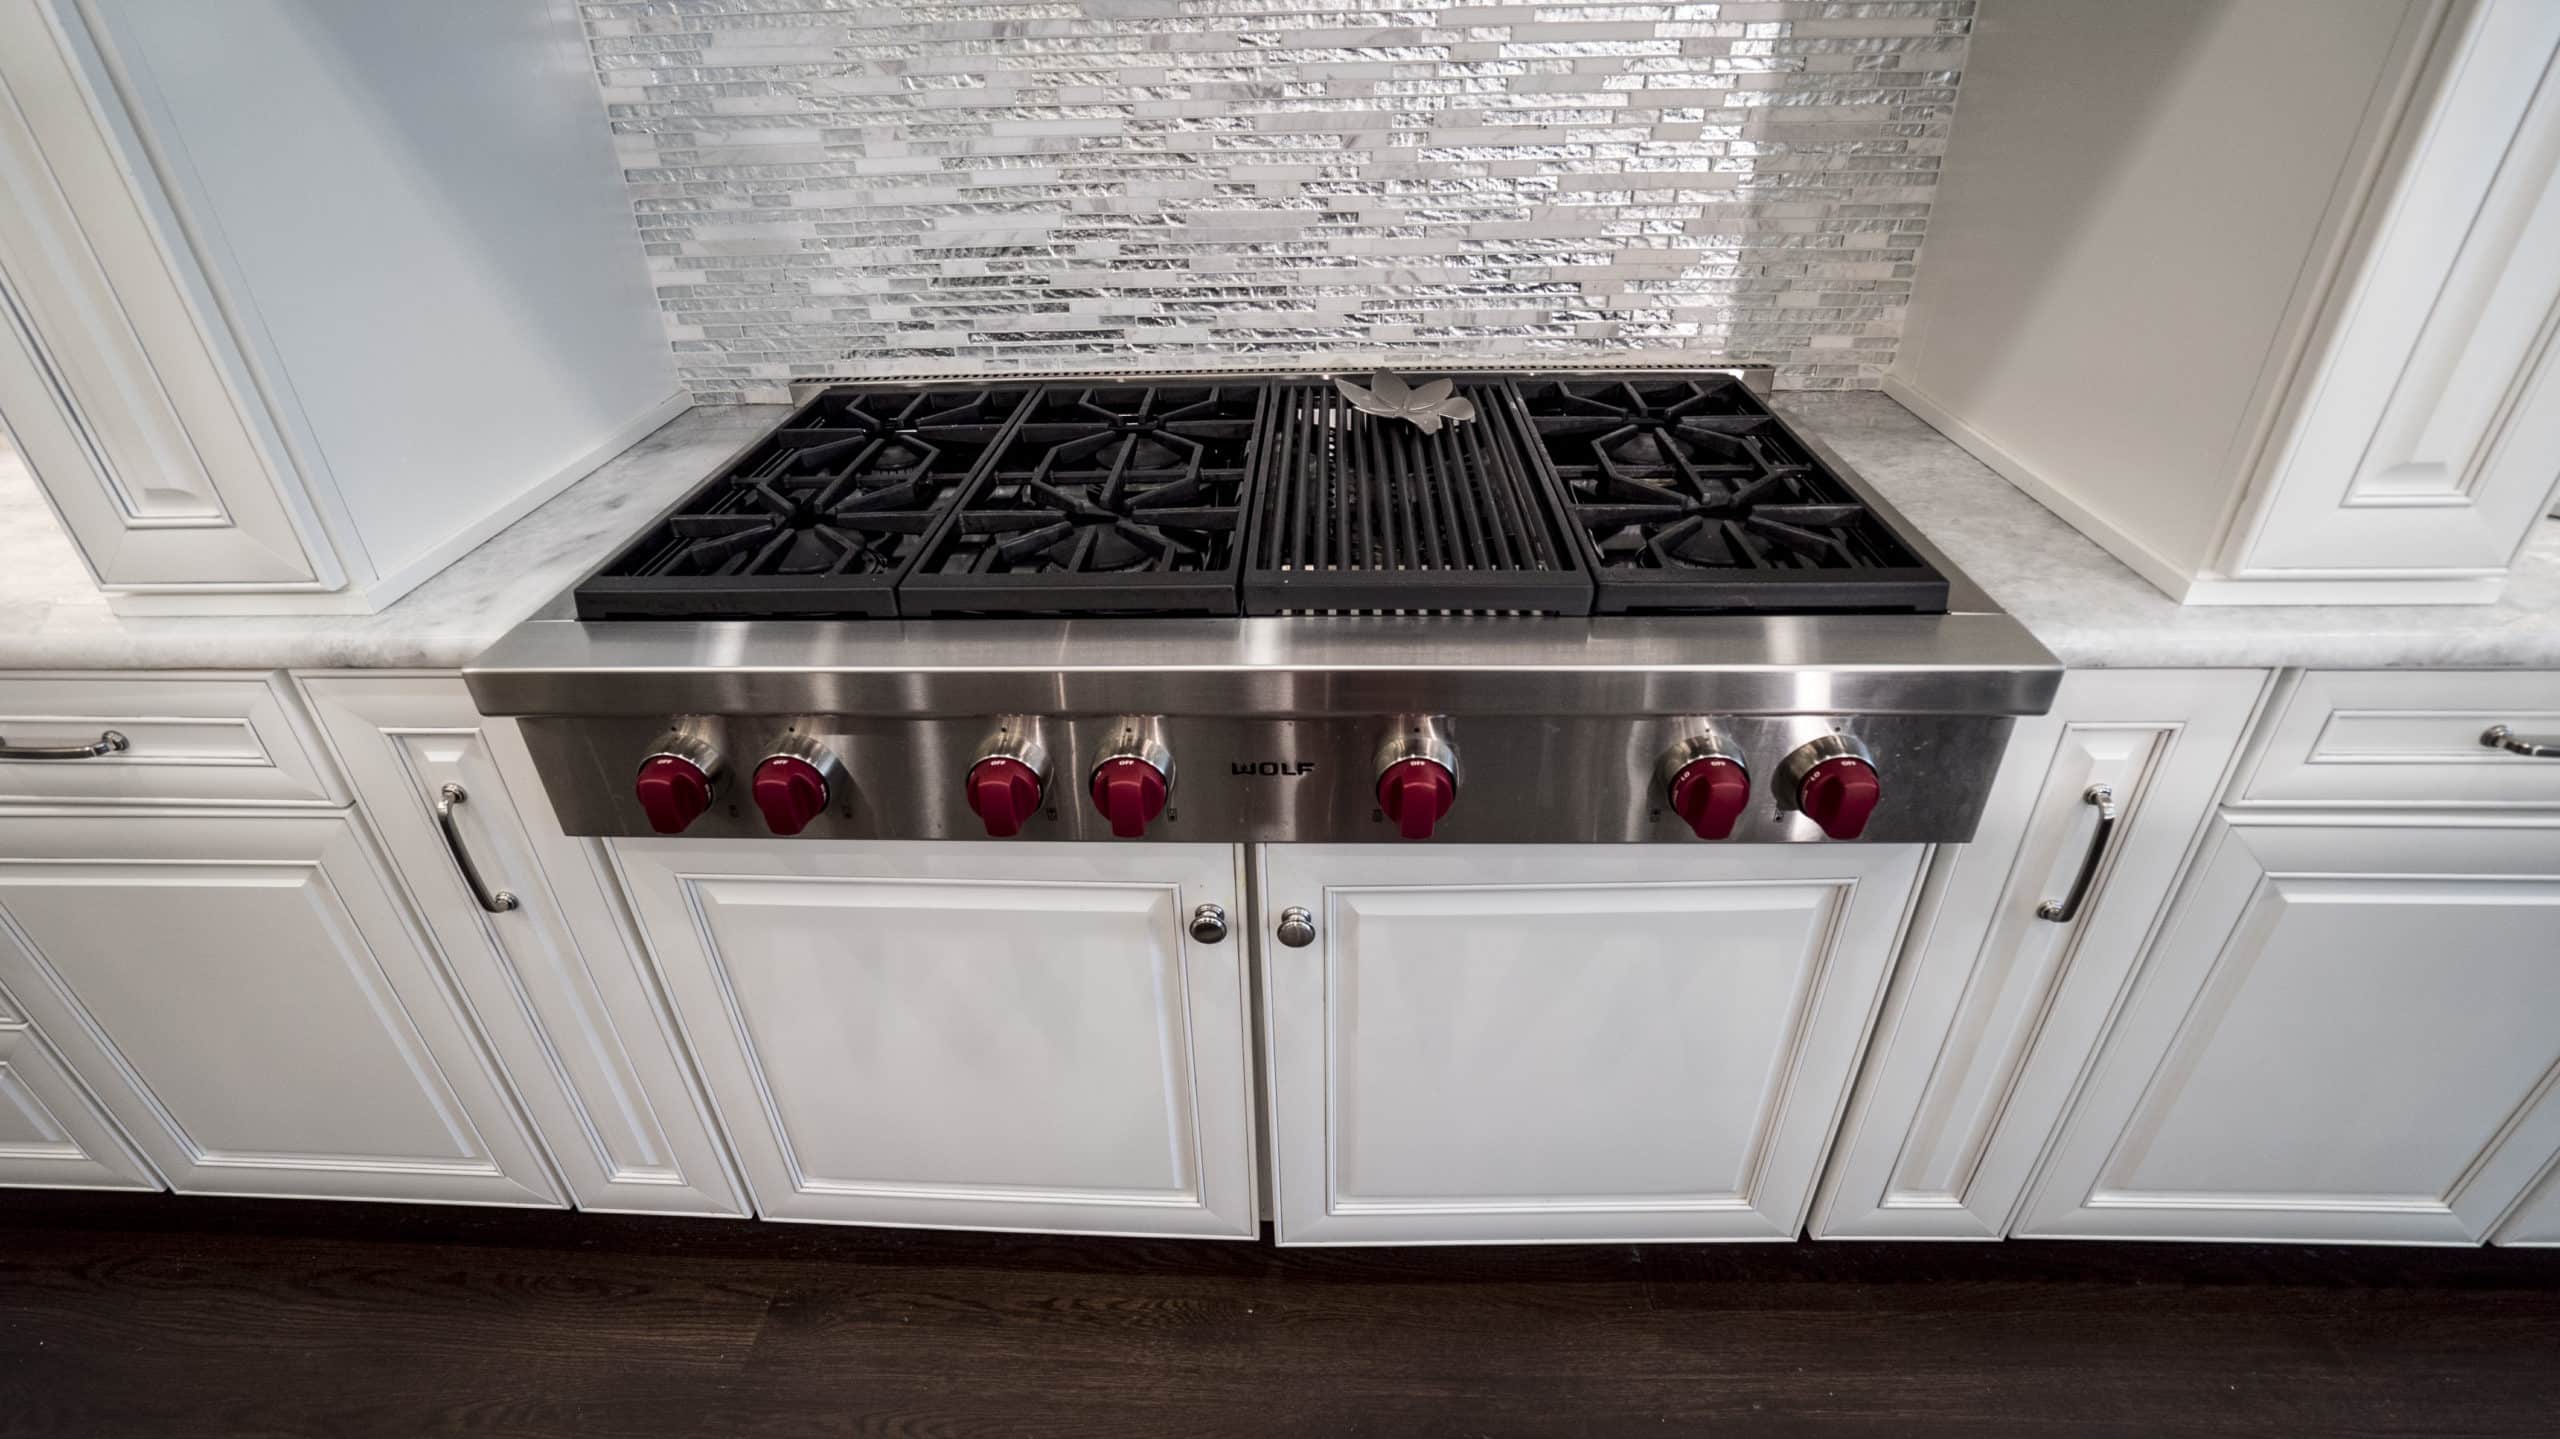 A stainless steel stove top in a white kitchen